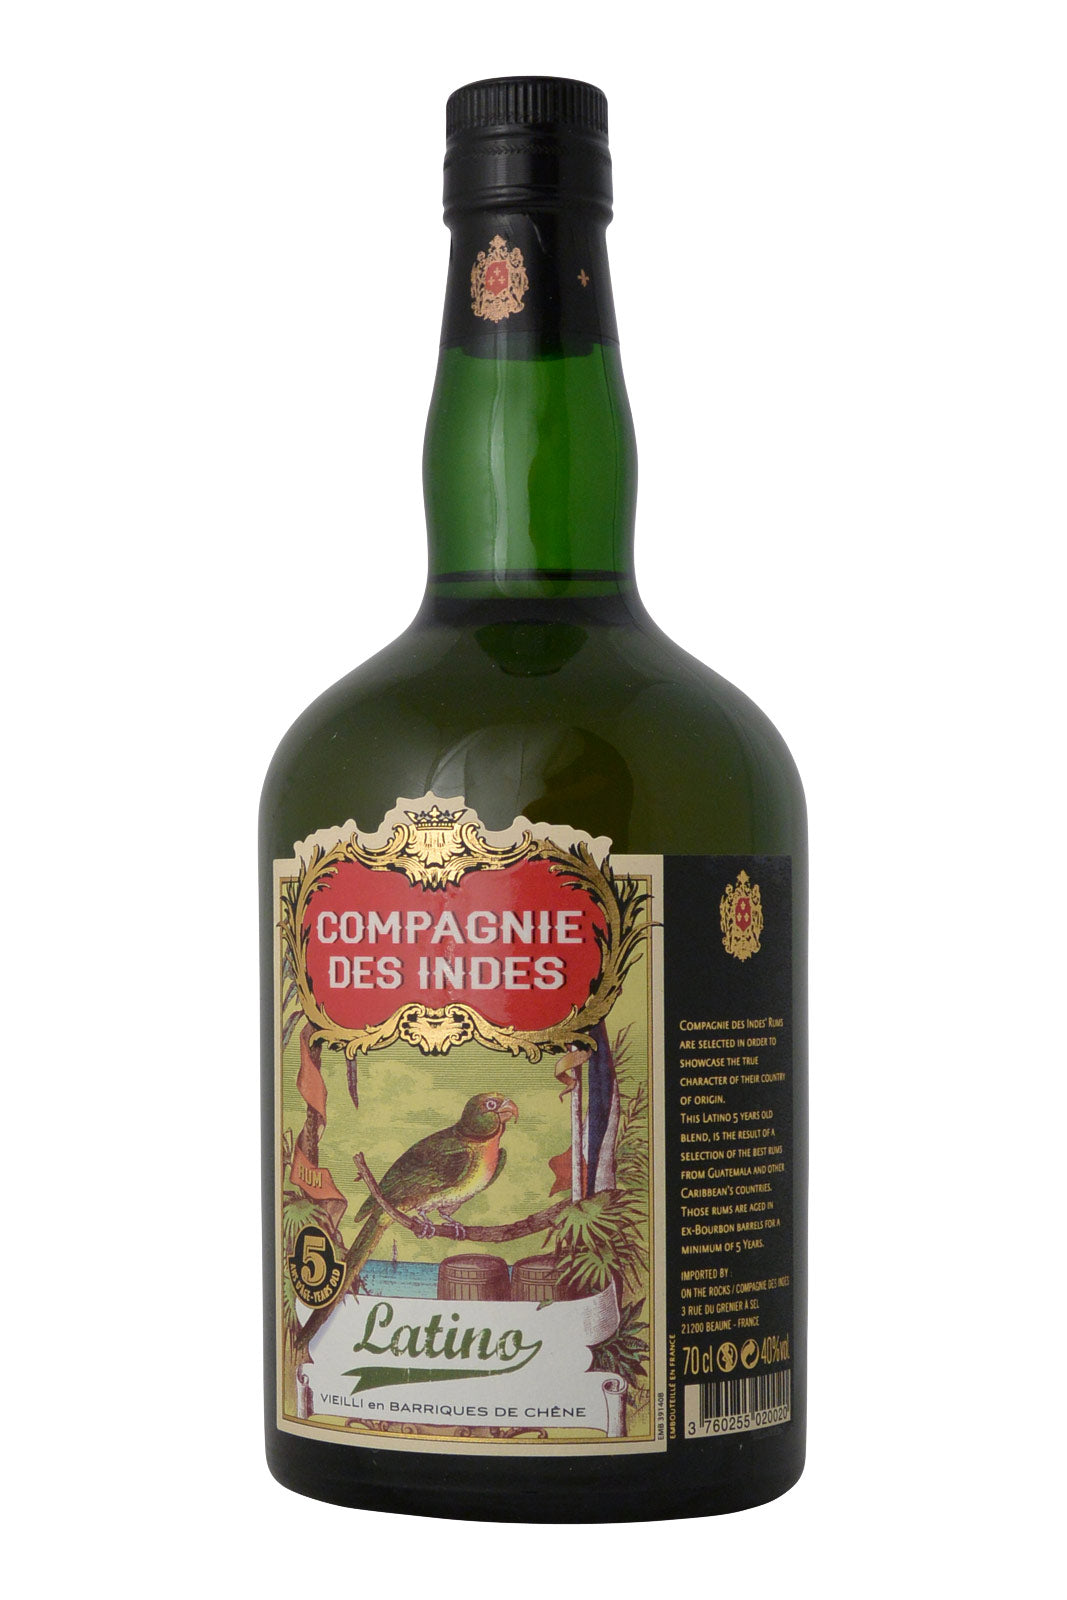 Compagnie des Indes Blend 5 Year Old Latino